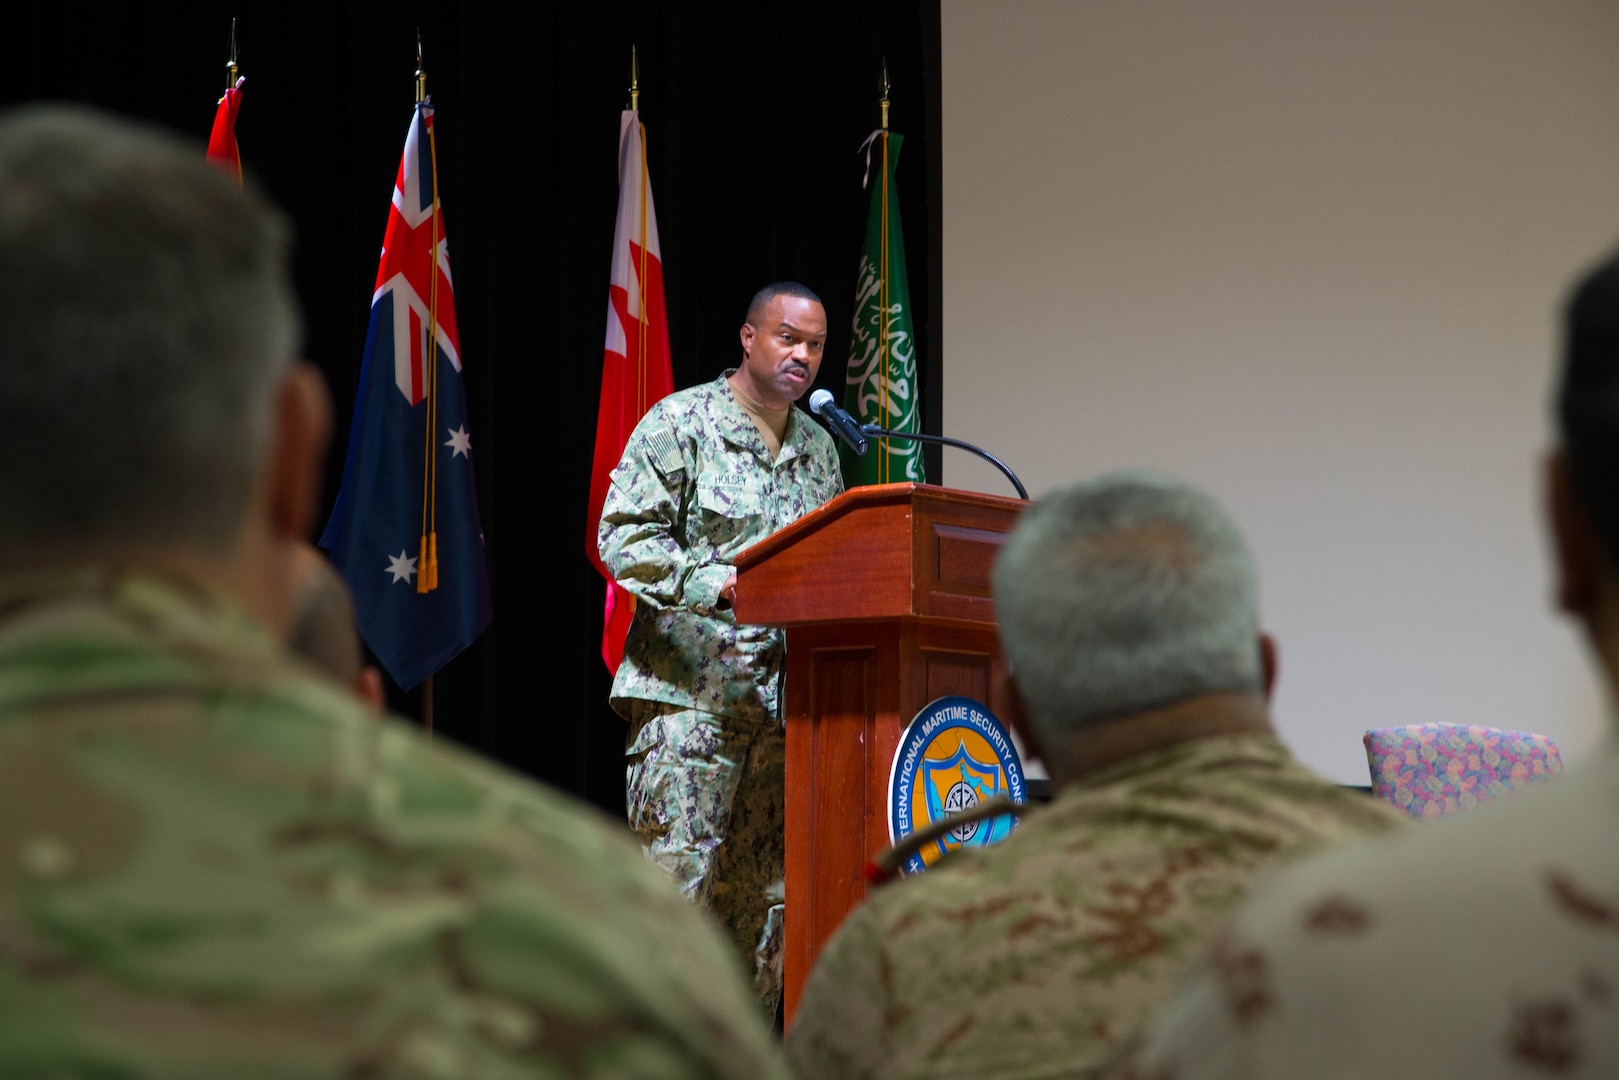 Rear Adm. Alvin Holsey, commander of the International Maritime Security Construct (IMSC), delivers remarks during a change of command ceremony for the IMSC. Holsey was relieved by Royal Navy Commodore James Parkin during the ceremony. IMSC maintains the freedom of navigation, international law, and free flow of commerce to support regional stability and security of the maritime commons.